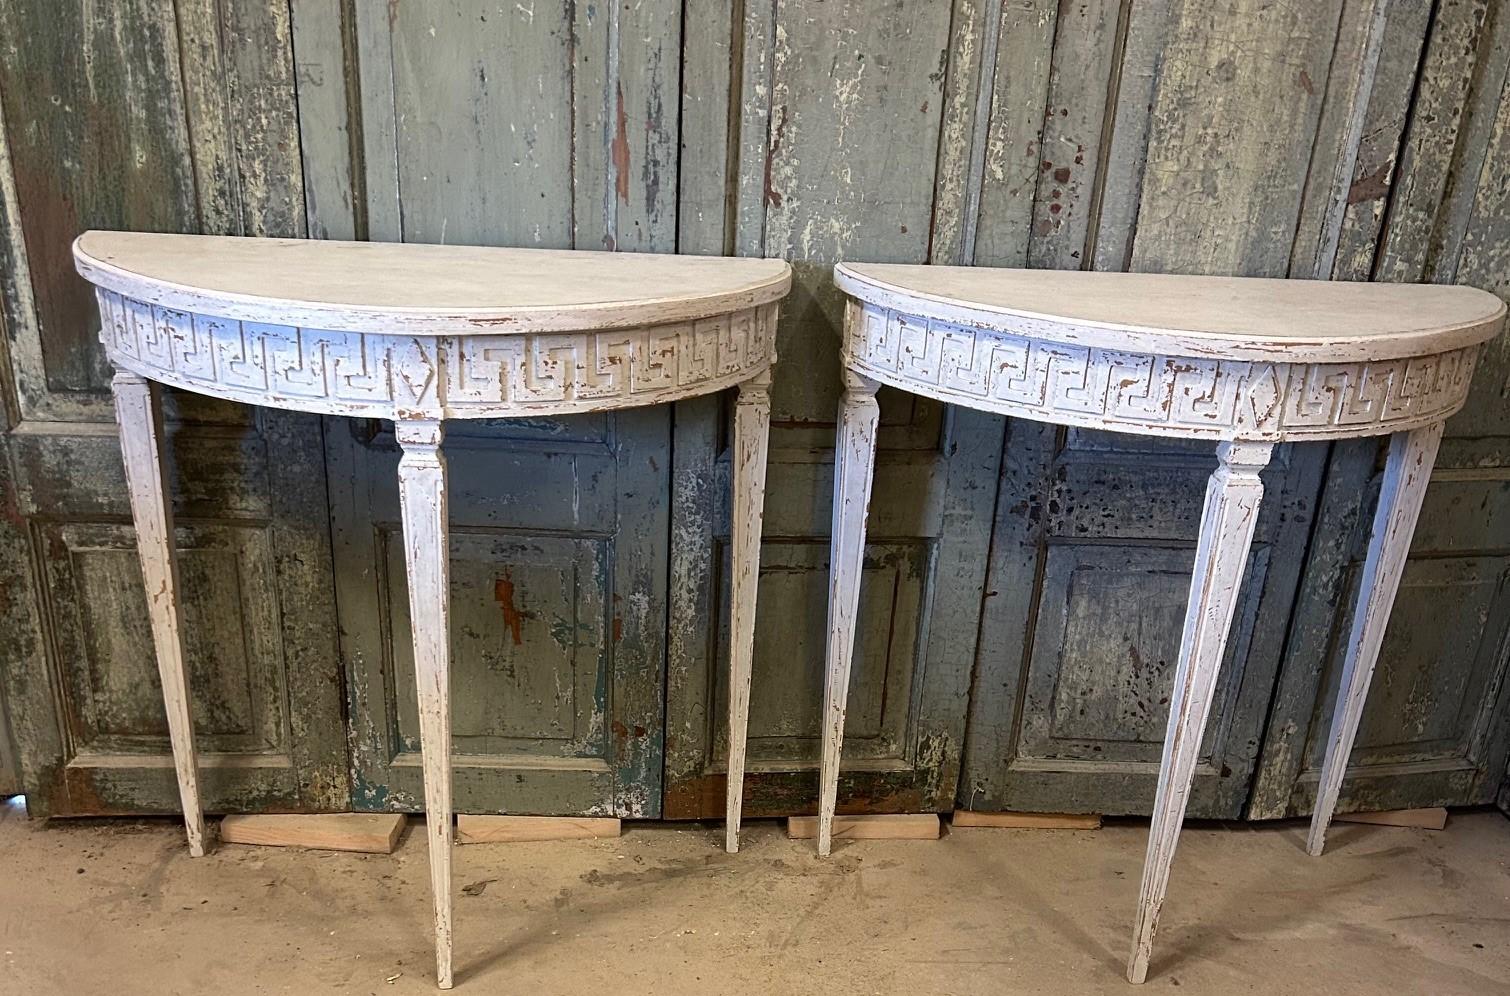 Pair of demilune console tables in Gustavian style.
Tabletop with profiled edge. Base with curved apron featuring carved à la grecque border and diamonds. Tapered legs with fluting.

Sweden, circa 1900.
Sold as a pair.